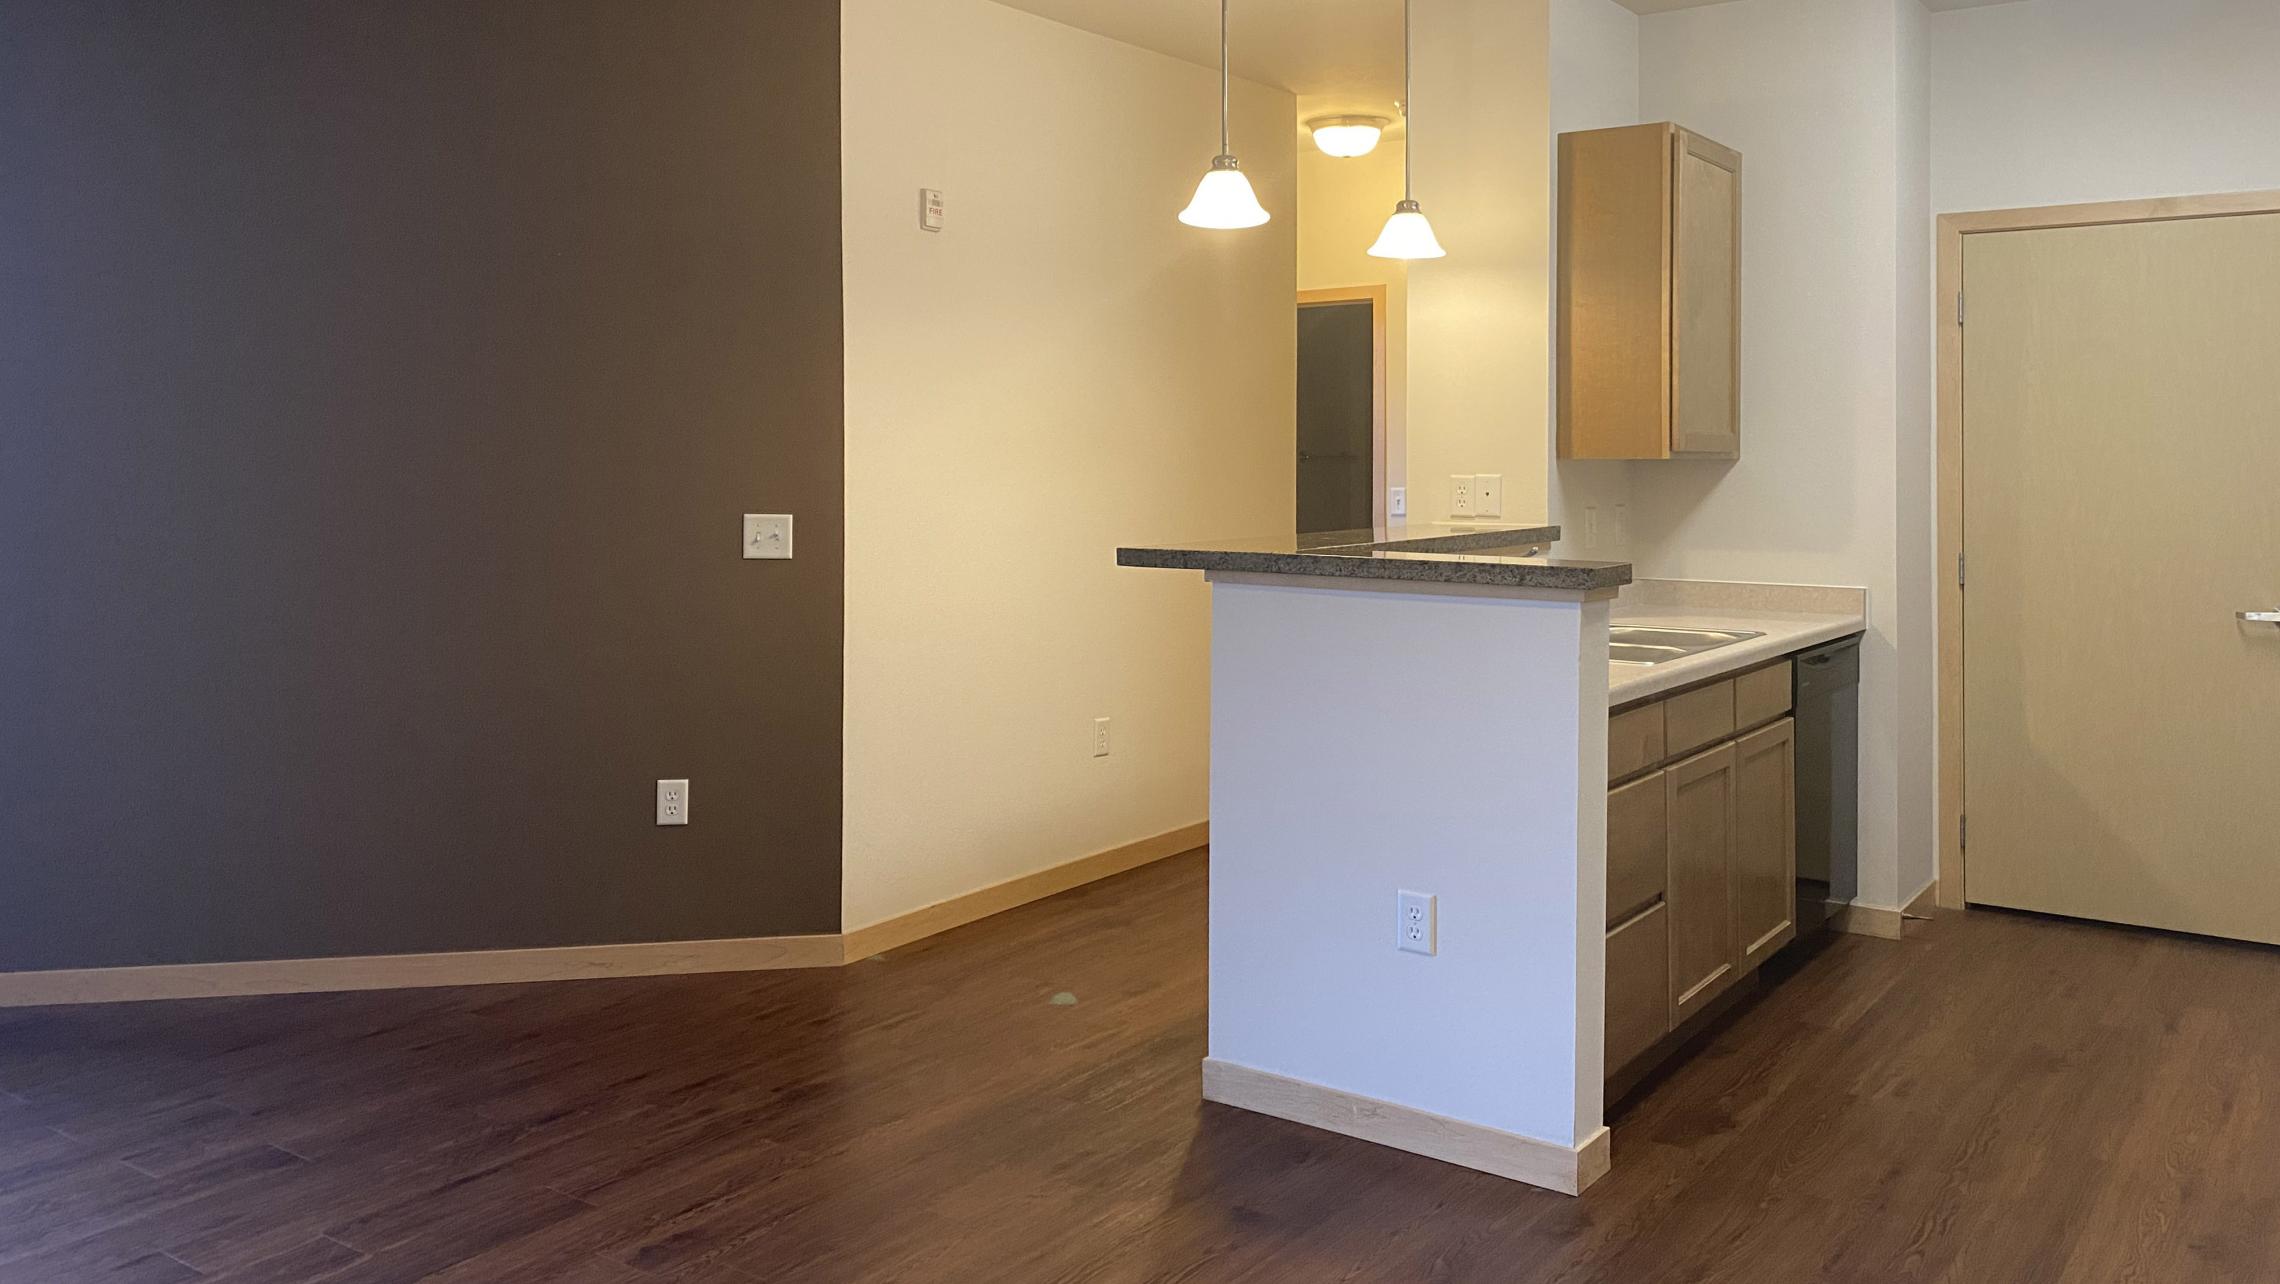 The-Depot-Apartment-1-210-Two-Bedroom-Kitchen-Living-Bathroom-Bathtub-Rooftop-Terrace-Fitness-Downtown-Madison-Capitol-Bike-Trails-Cats-Lifestyle-City-Lake